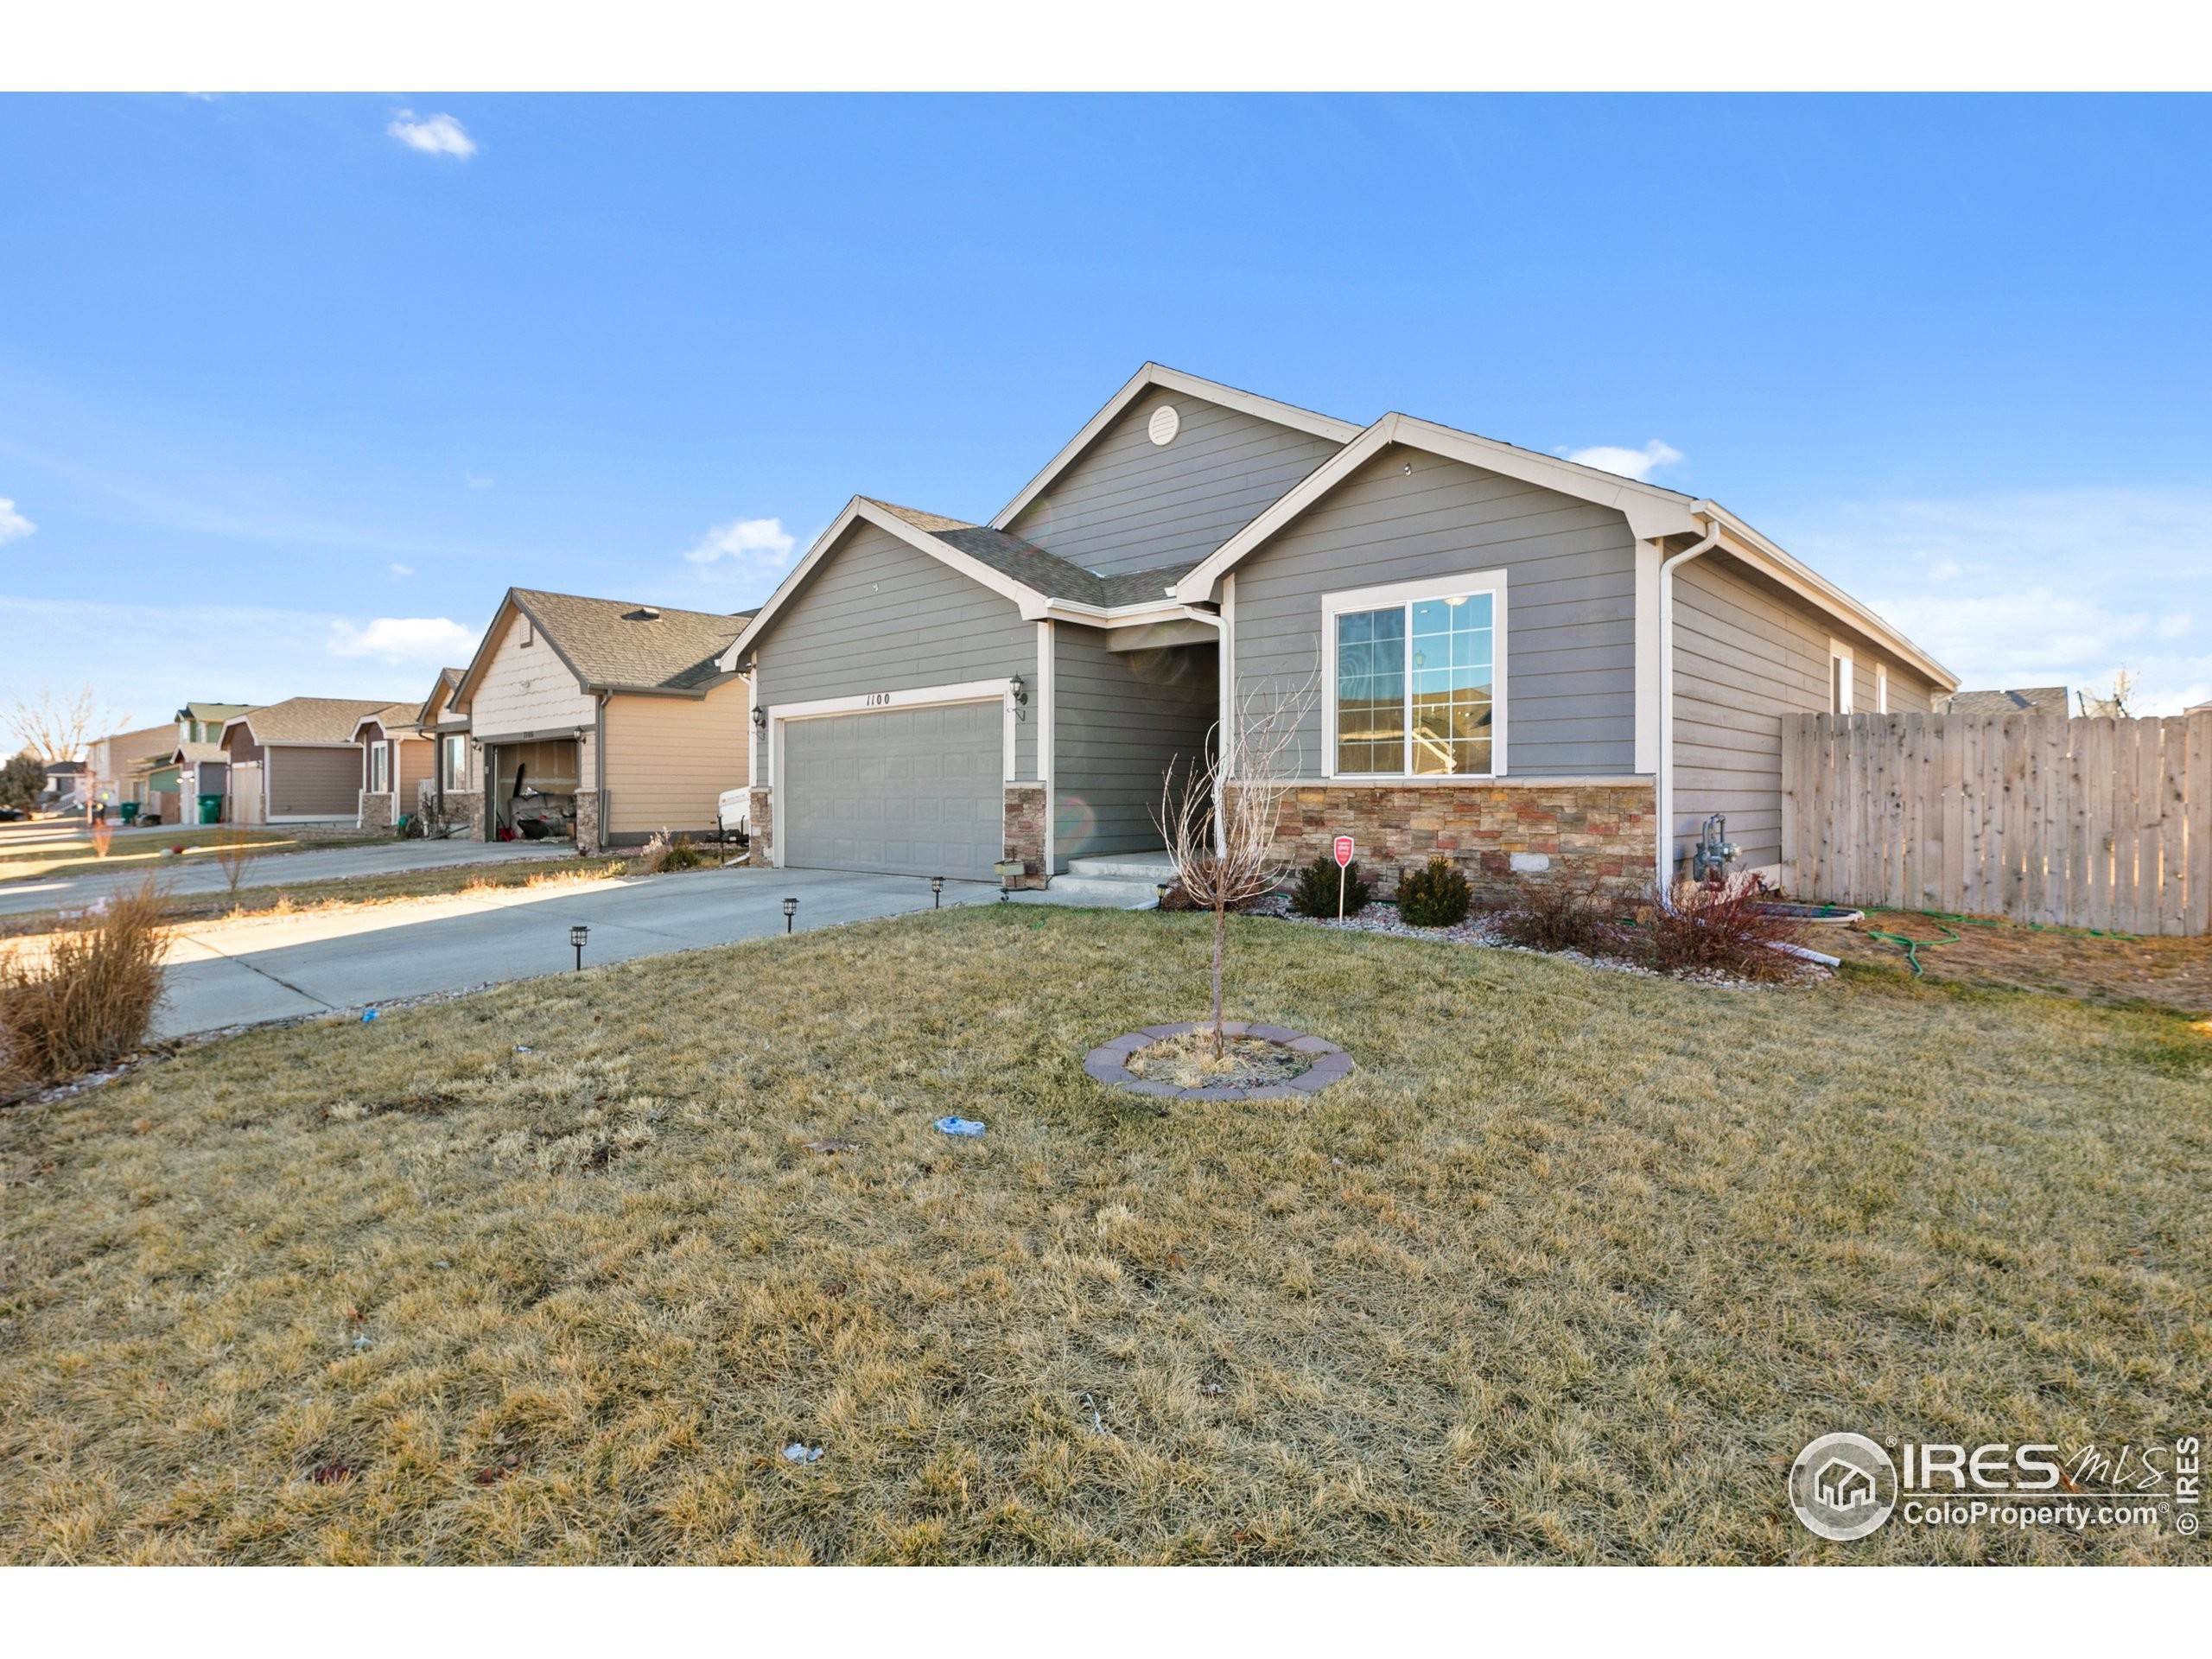 2. Single Family Homes for Active at 1100 E 25th Street Greeley, Colorado 80631 United States